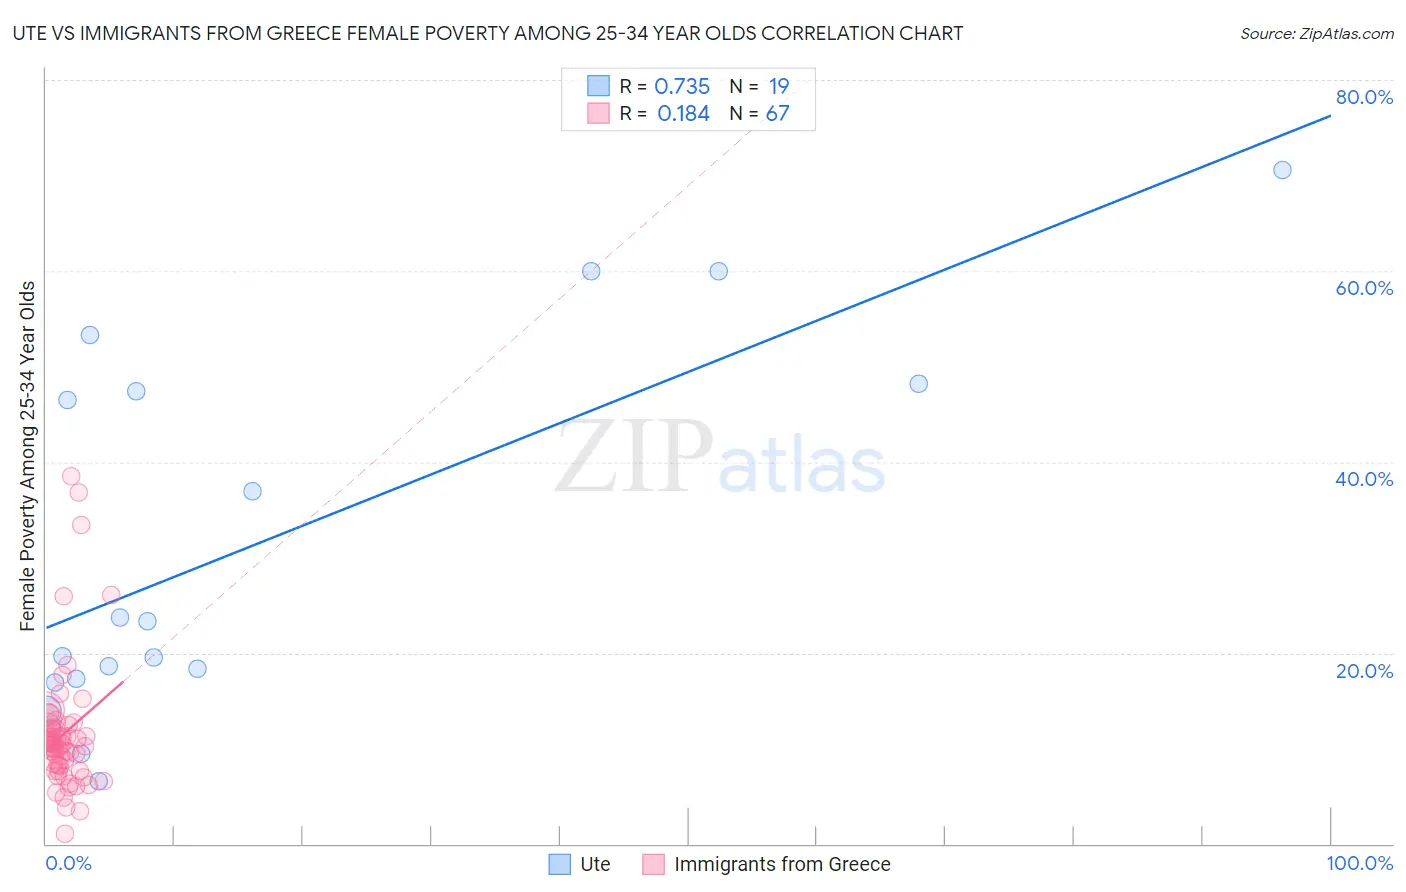 Ute vs Immigrants from Greece Female Poverty Among 25-34 Year Olds